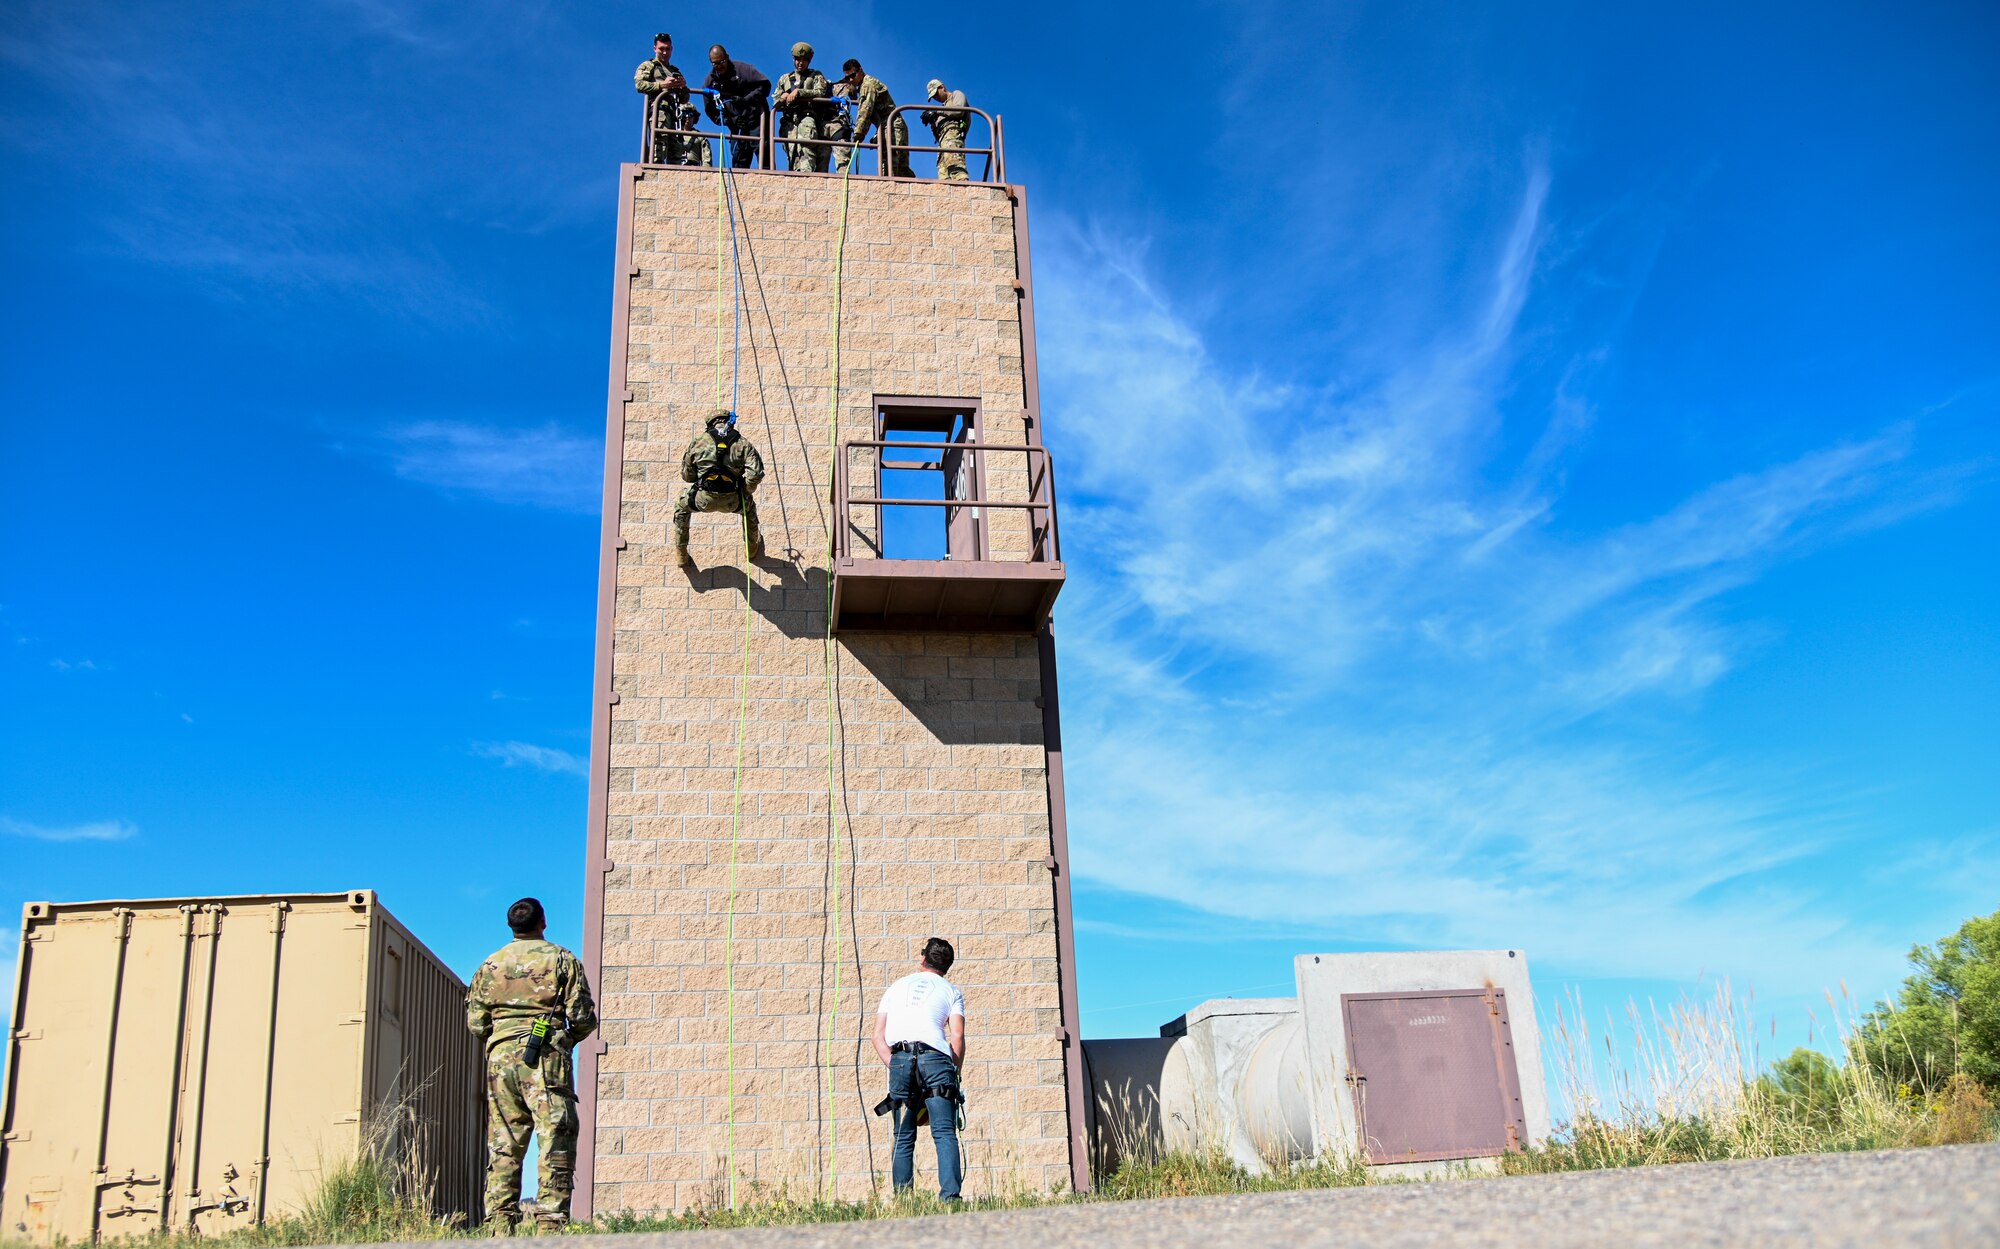 Members from the 49th Security Forces Squadron and 49th Civil Engineer Squadron participate in the 49th Wing’s first rappel skills training, Oct. 5, 2021, on Holloman Air Force Base, New Mexico. The training lasted two days, one day for learning about the equipment in the classroom and the second for practical skills application. (U.S. Air Force photo by Airman 1st Class Jessica Sanchez-Chen)